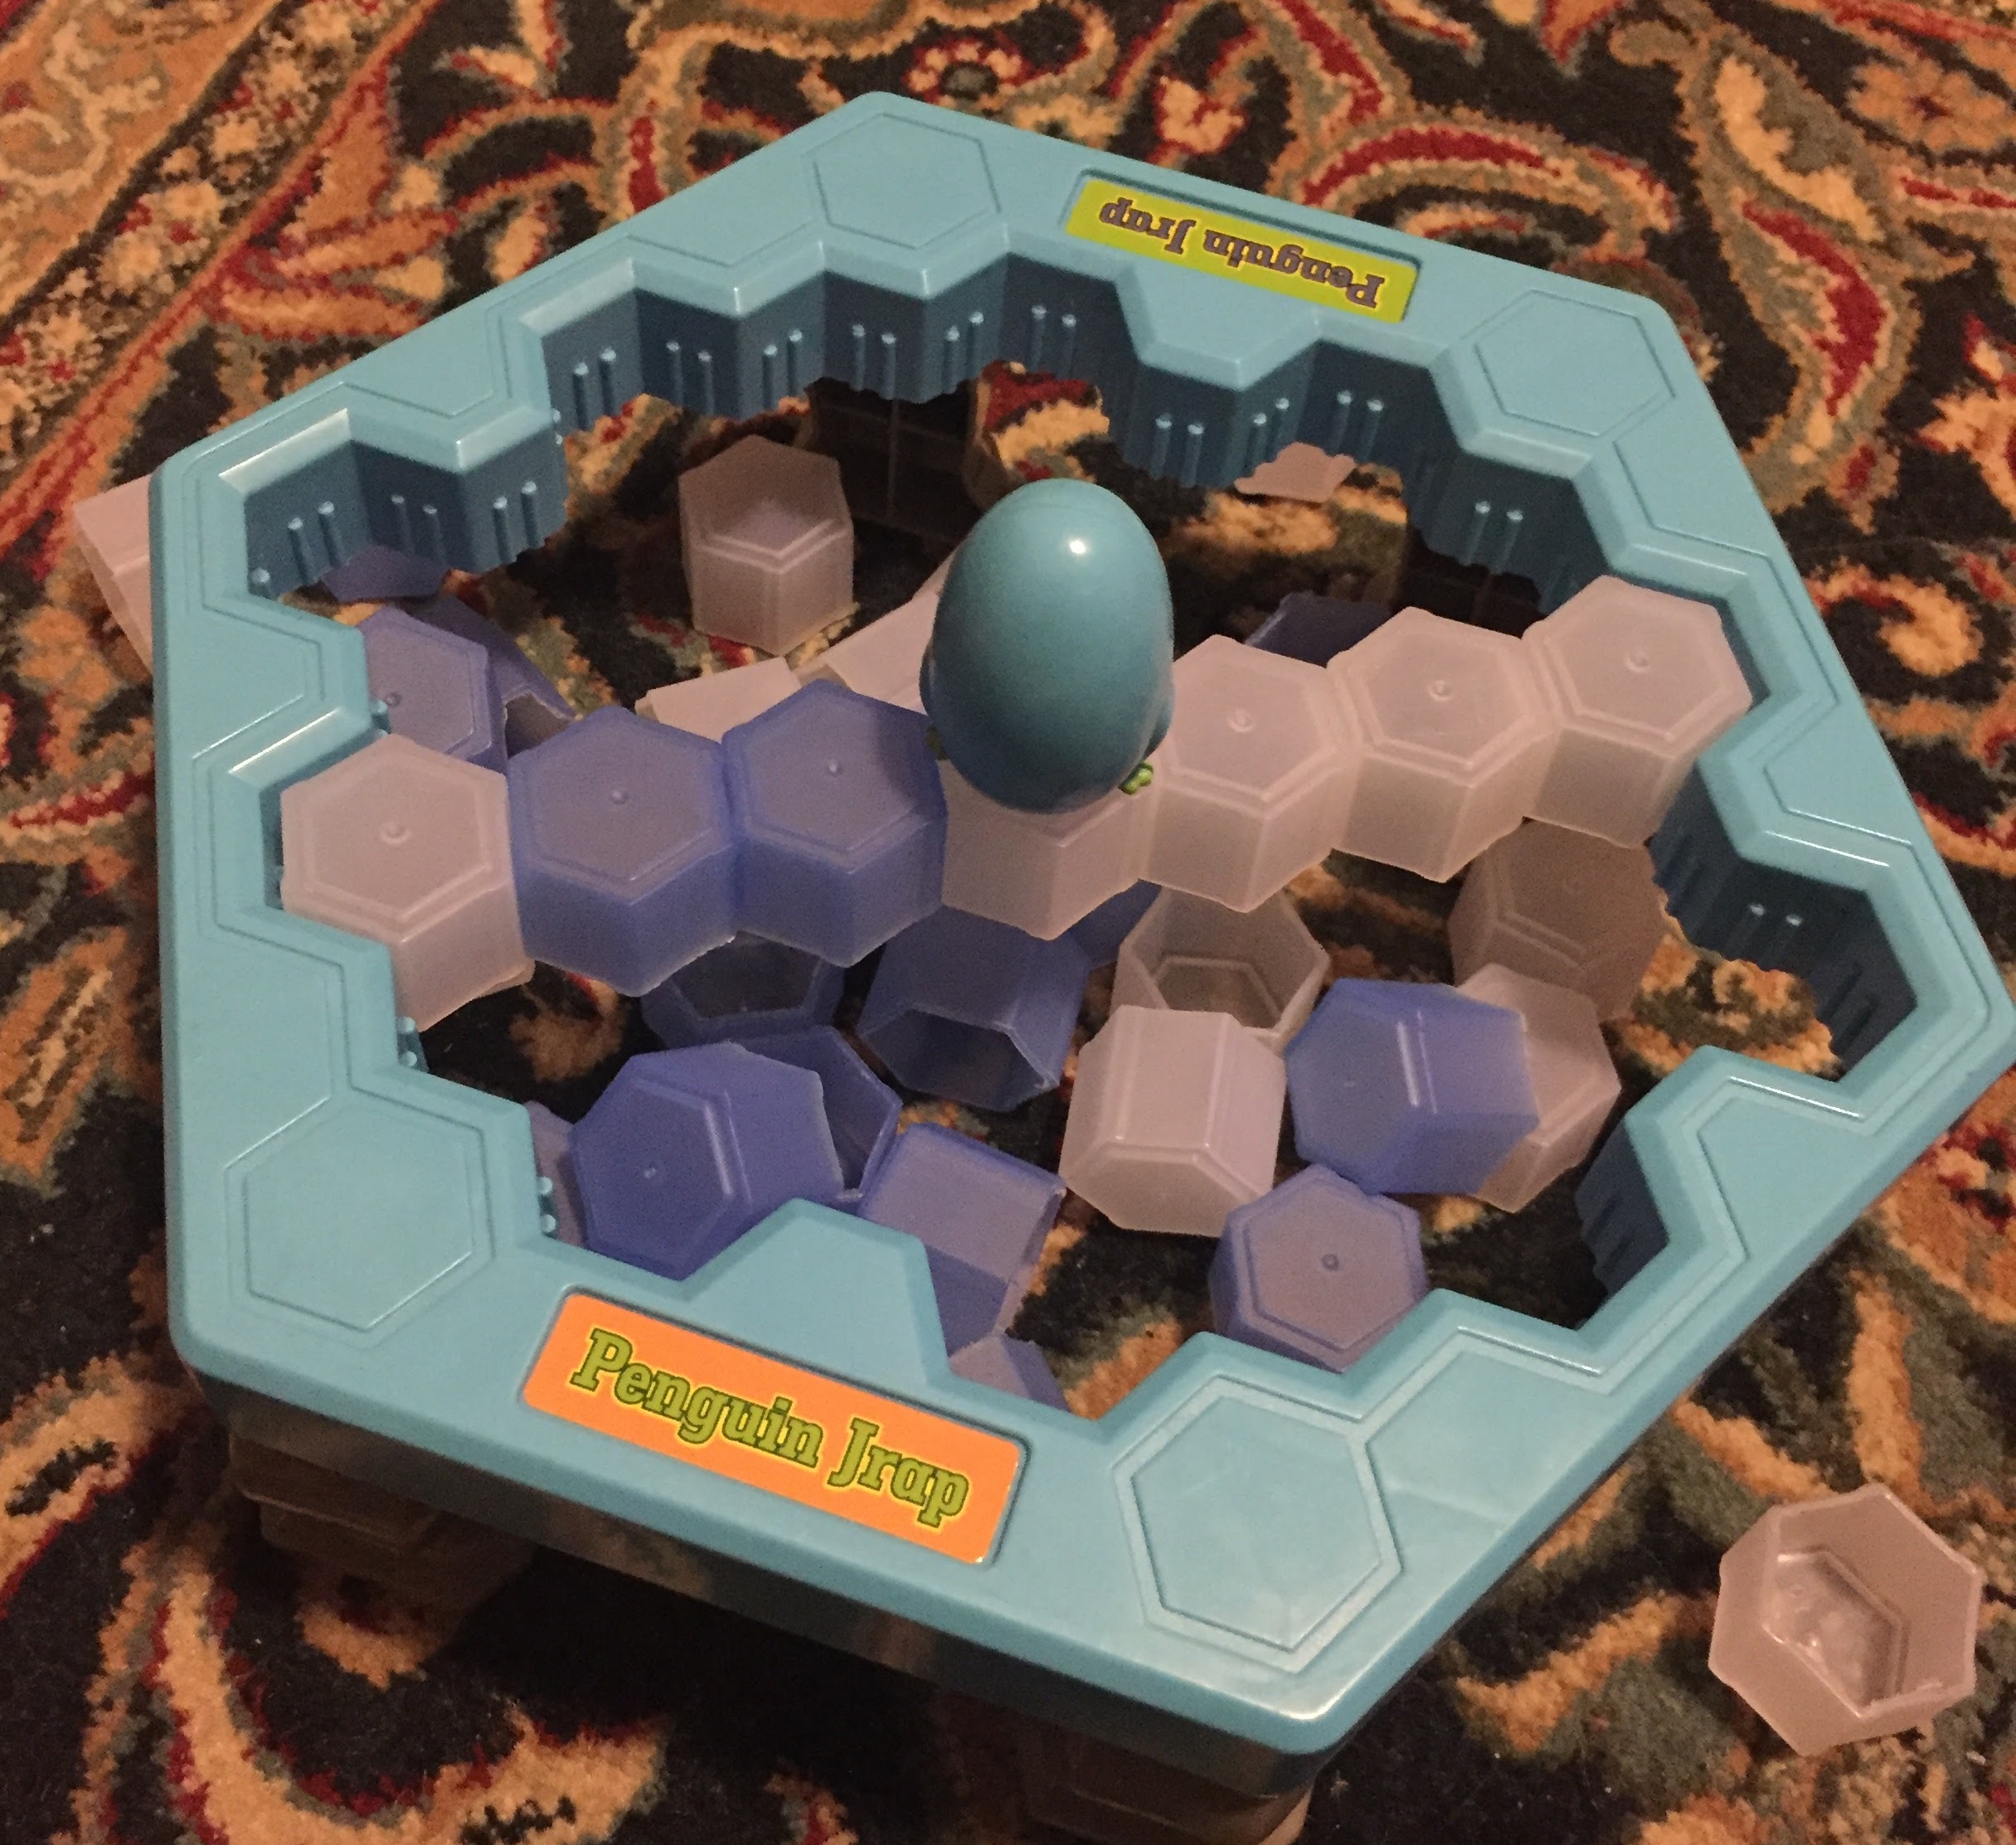 A penguin figure perched precariously on a line of hexagonal ice blocks as part of the game Penguin Jrap